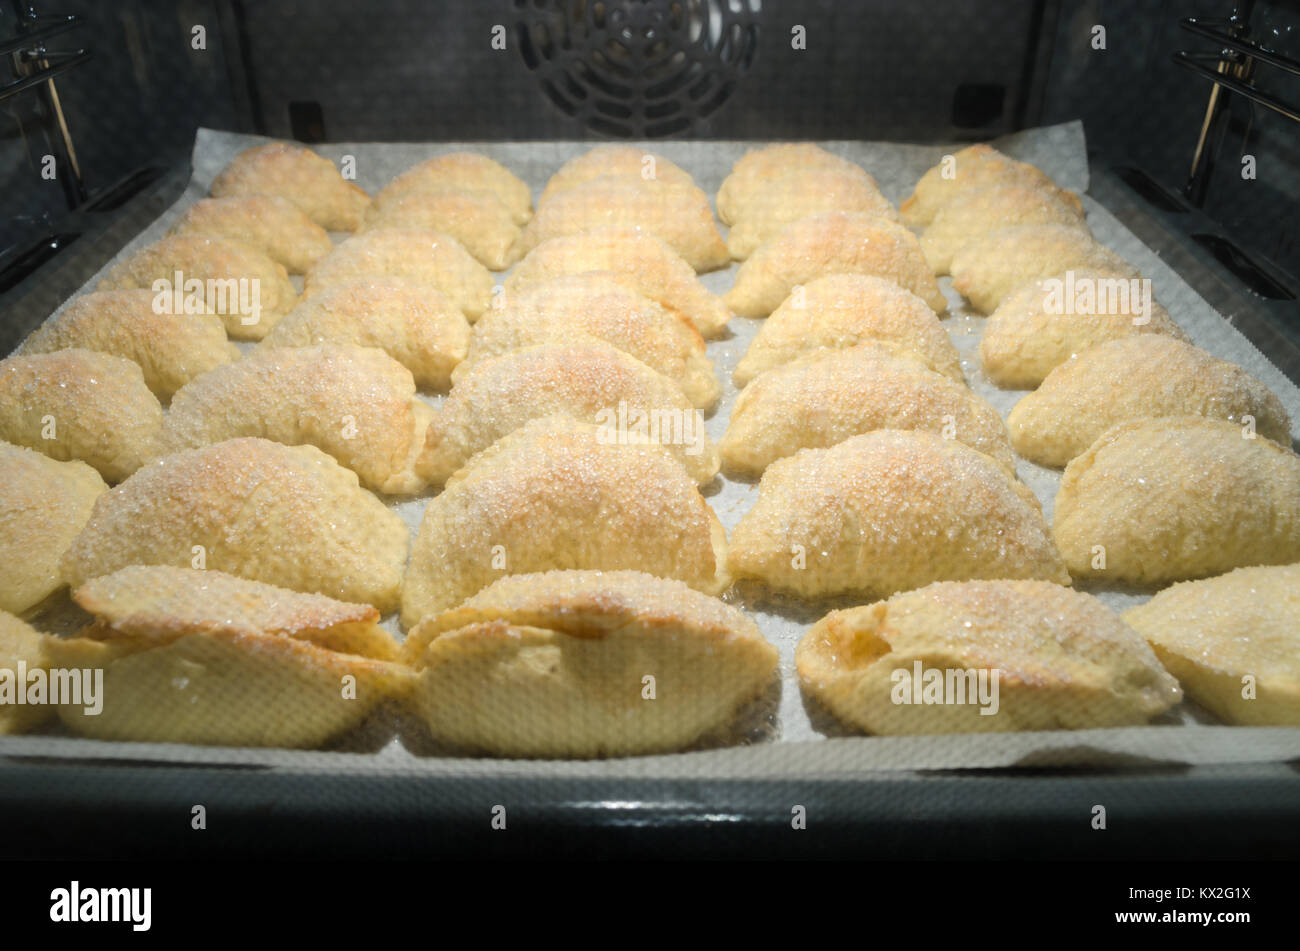 Set of homemade sweet yeast croissants covered in sugar crystals and filled with apples, during baking inside home bakery oven. Stock Photo